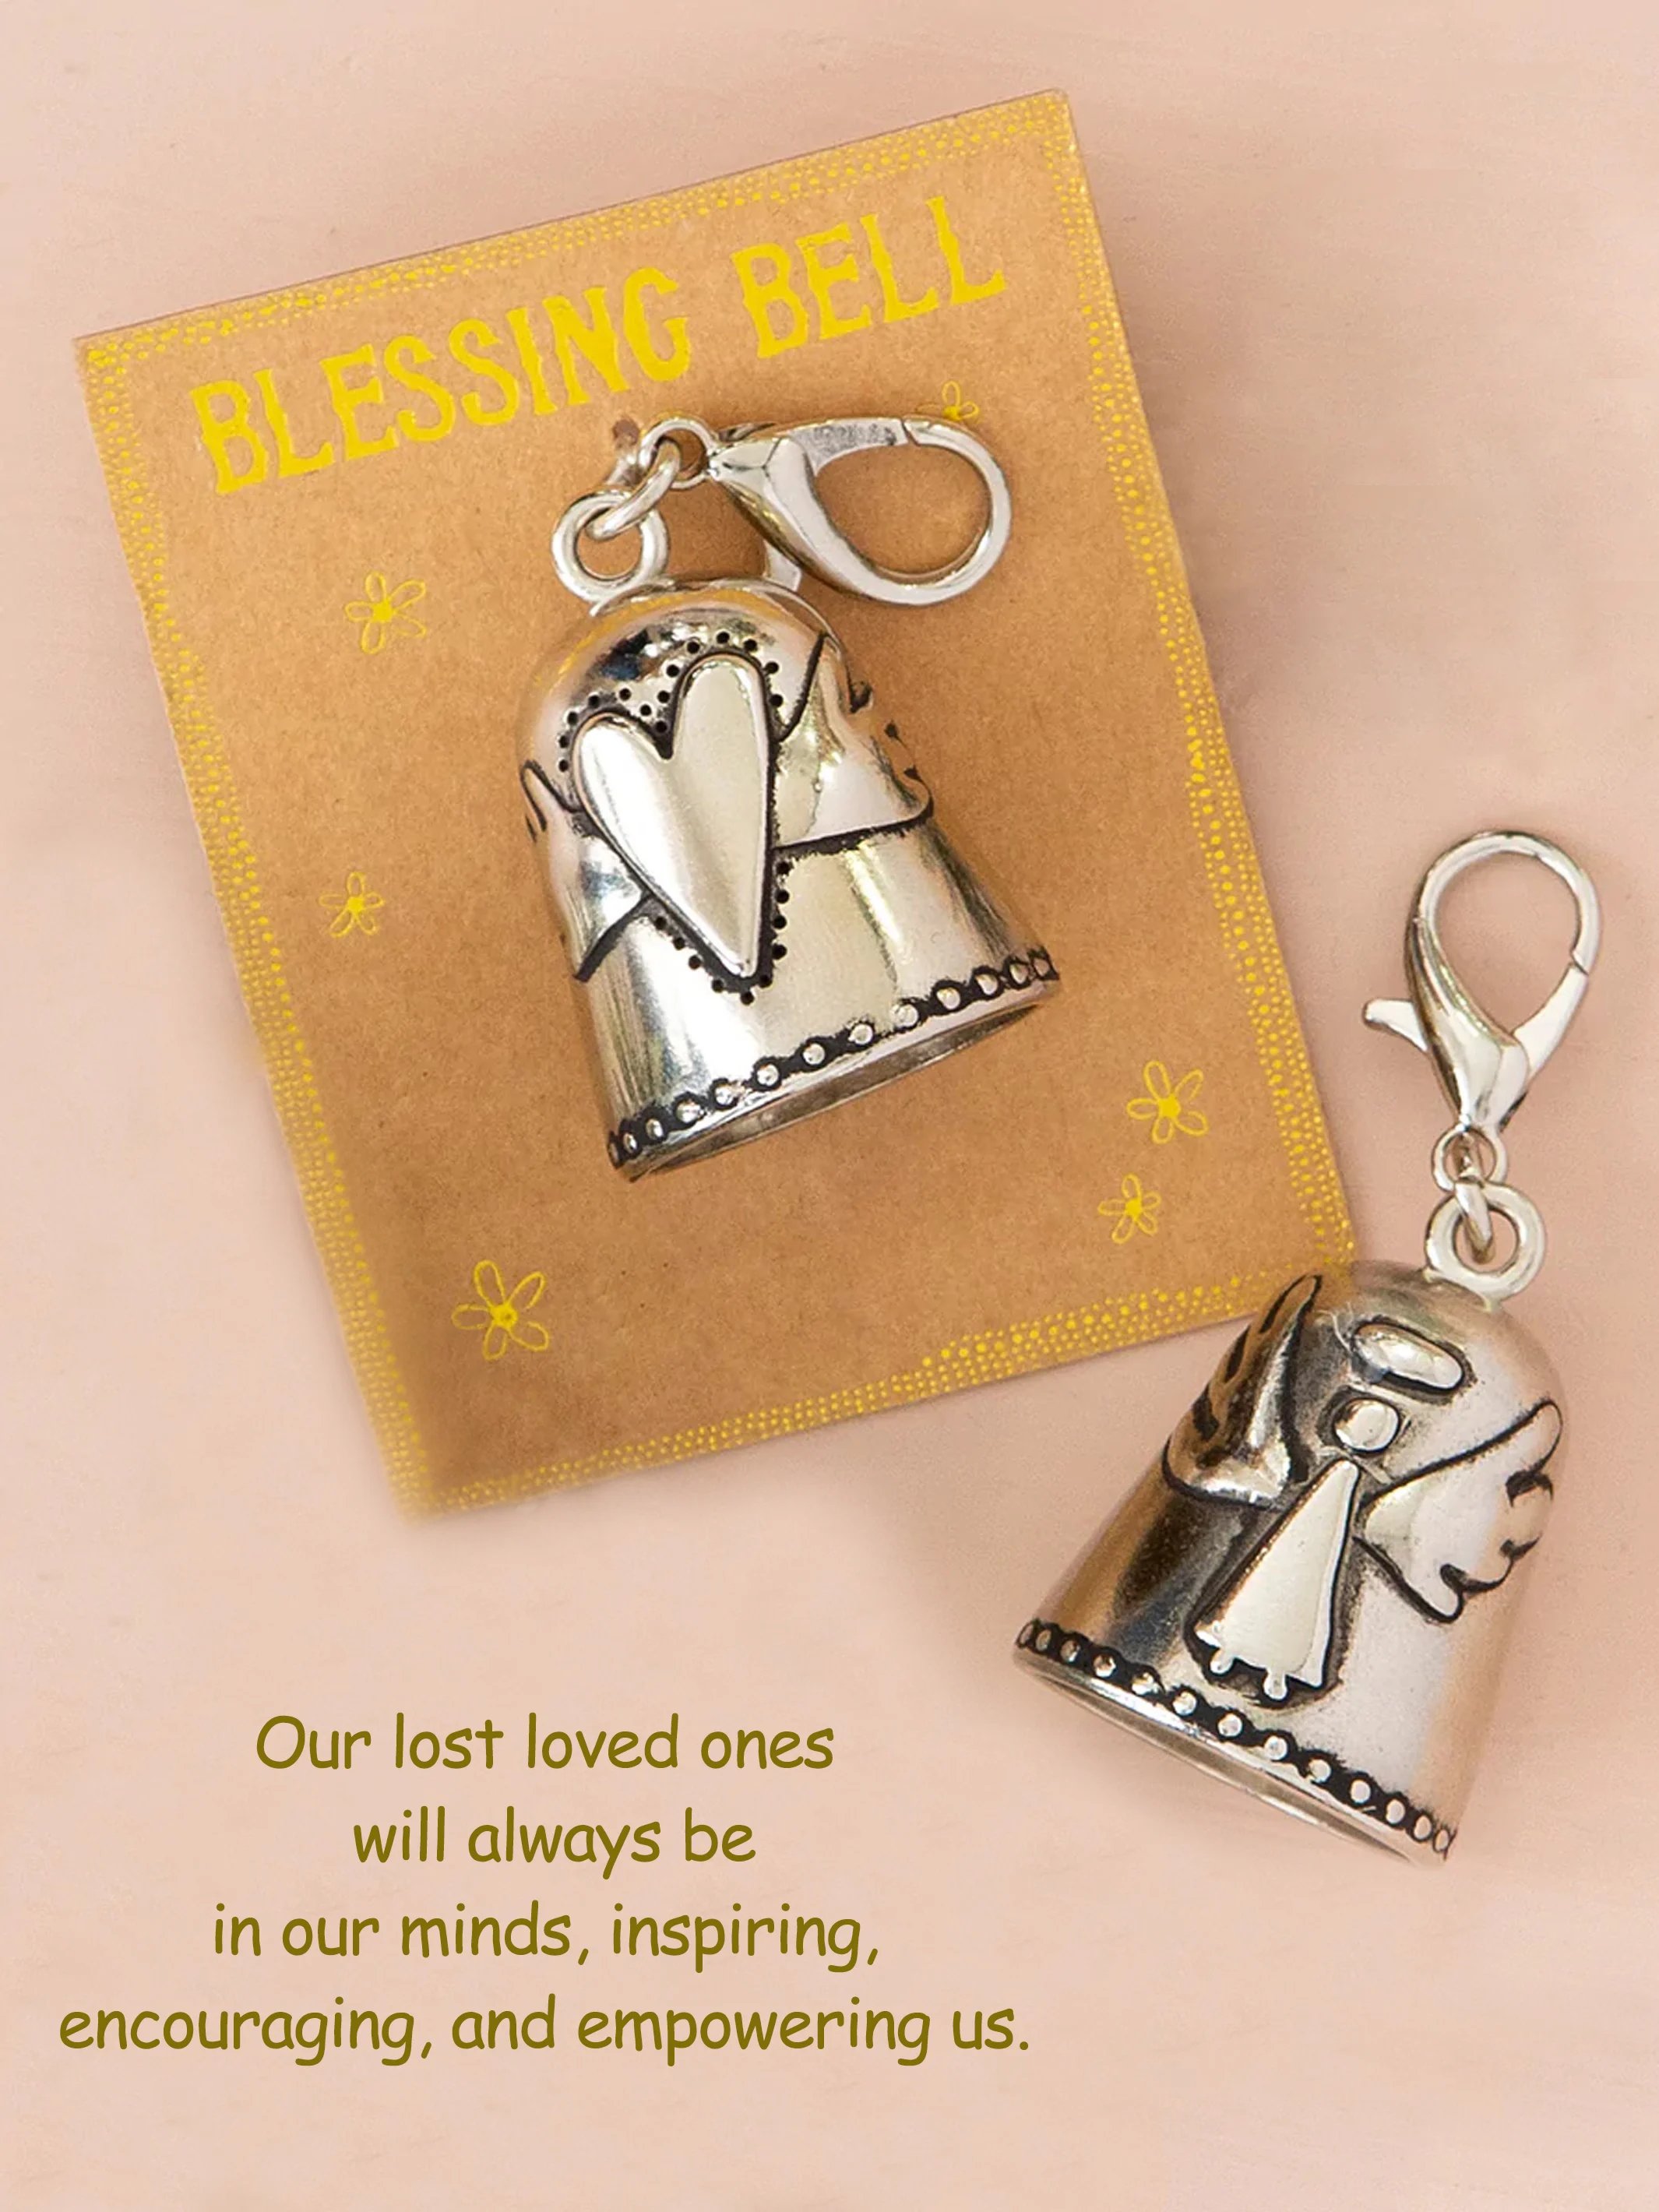 ⏰Last Day Clearance Sale 75% OFF🎉Blessing Bell Friends are Angels❤️Best Gift To Who You Love💕